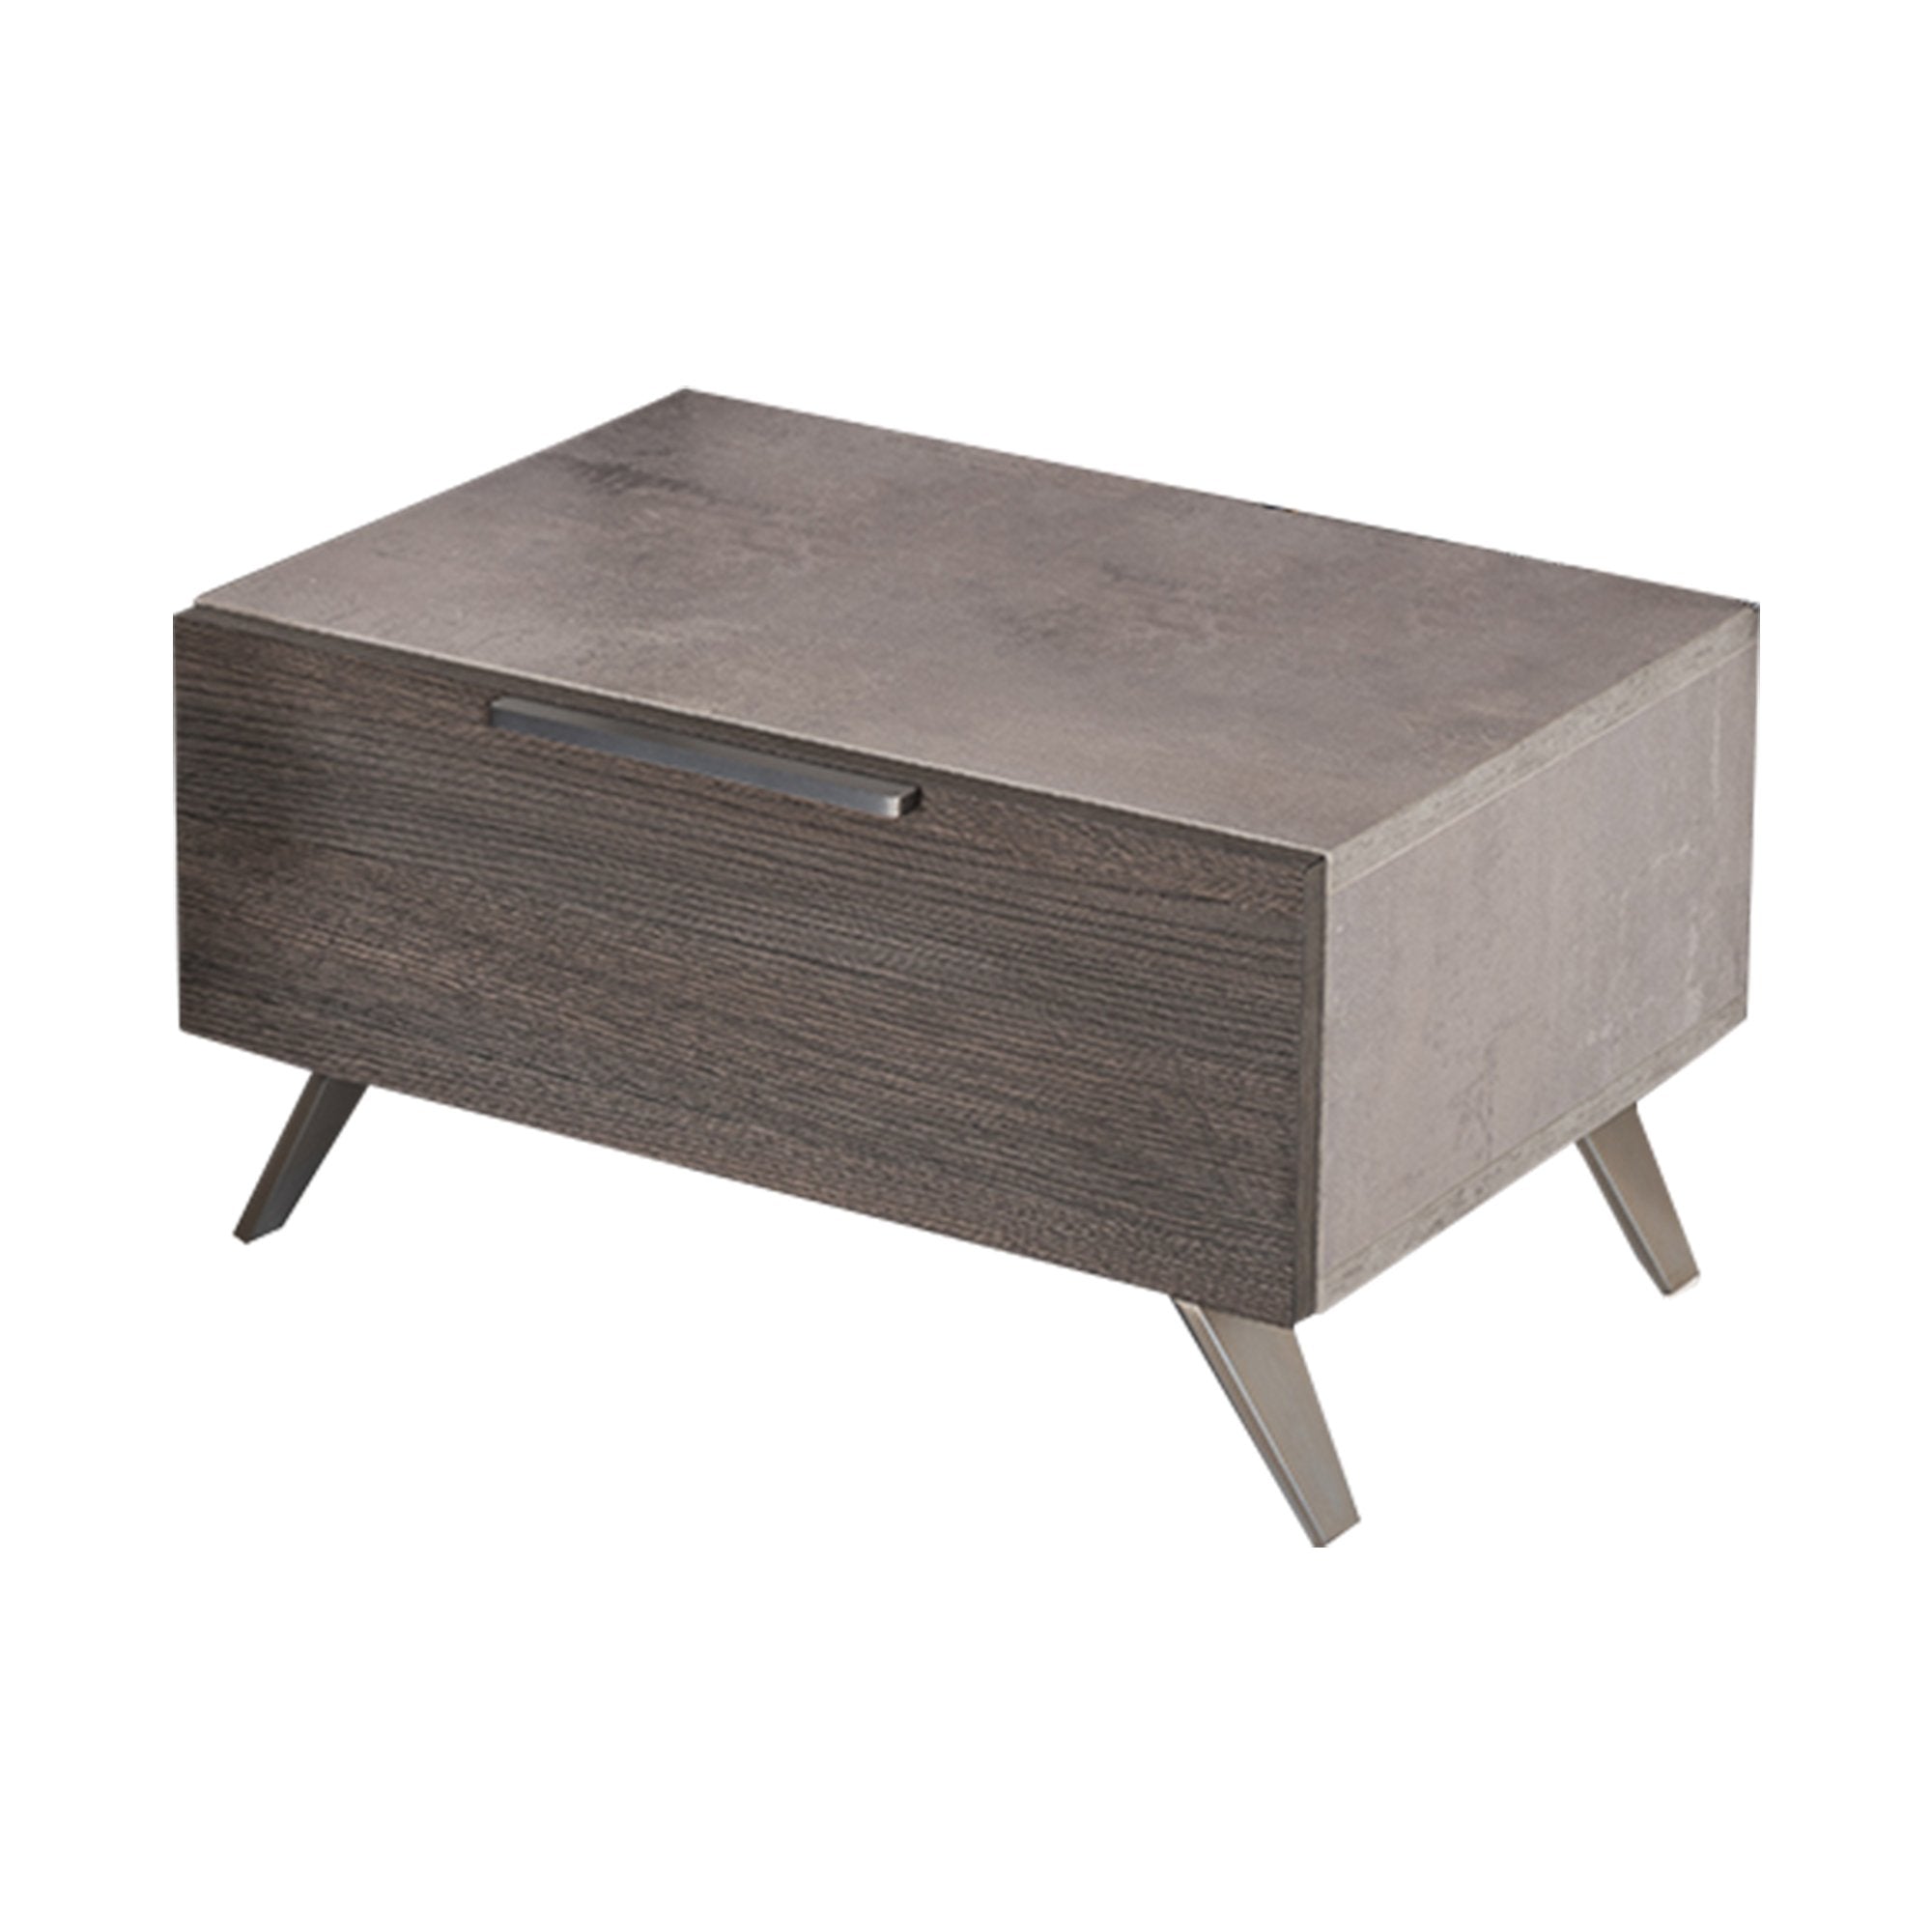 Benzara Benzara BM223476 1 Drawer Faux Concrete Nightstand with Metal Handle and Angled Legs Concrete Nightstands BM223476